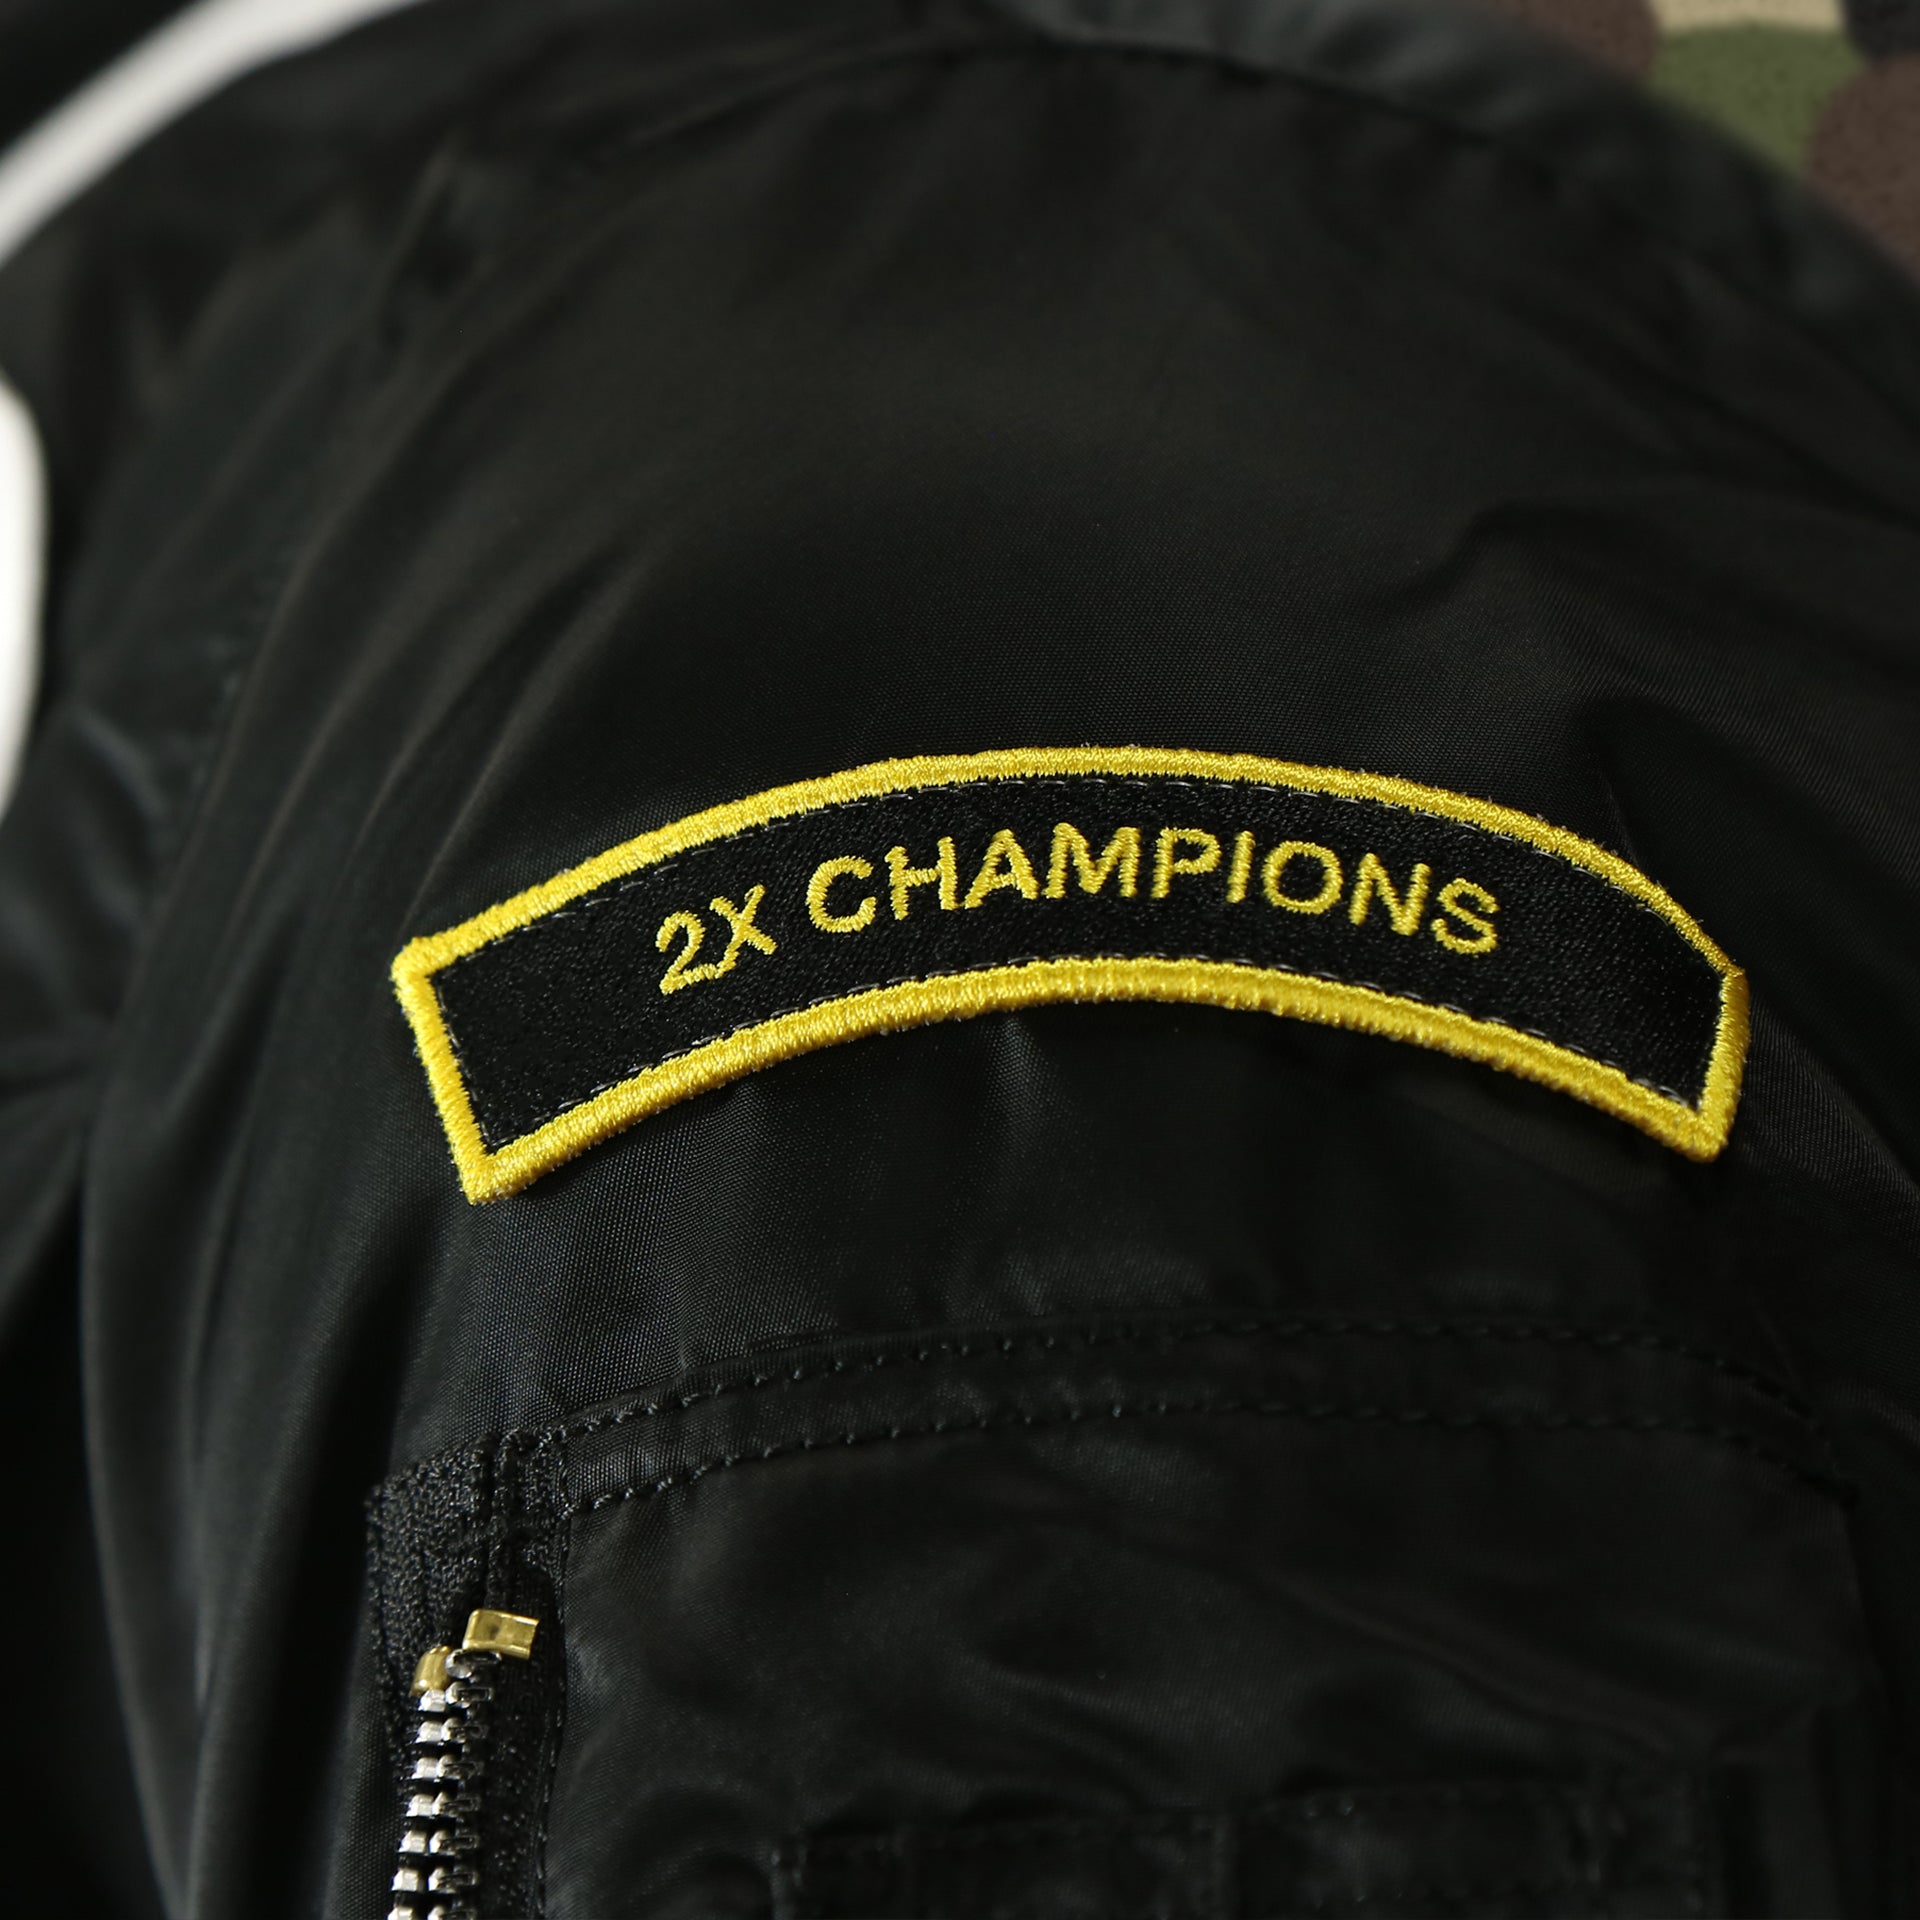 2X champions patch on the Florida Marlins MLB Patch Alpha Industries Reversible Bomber Jacket With Camo Liner | Black Bomber Jacket